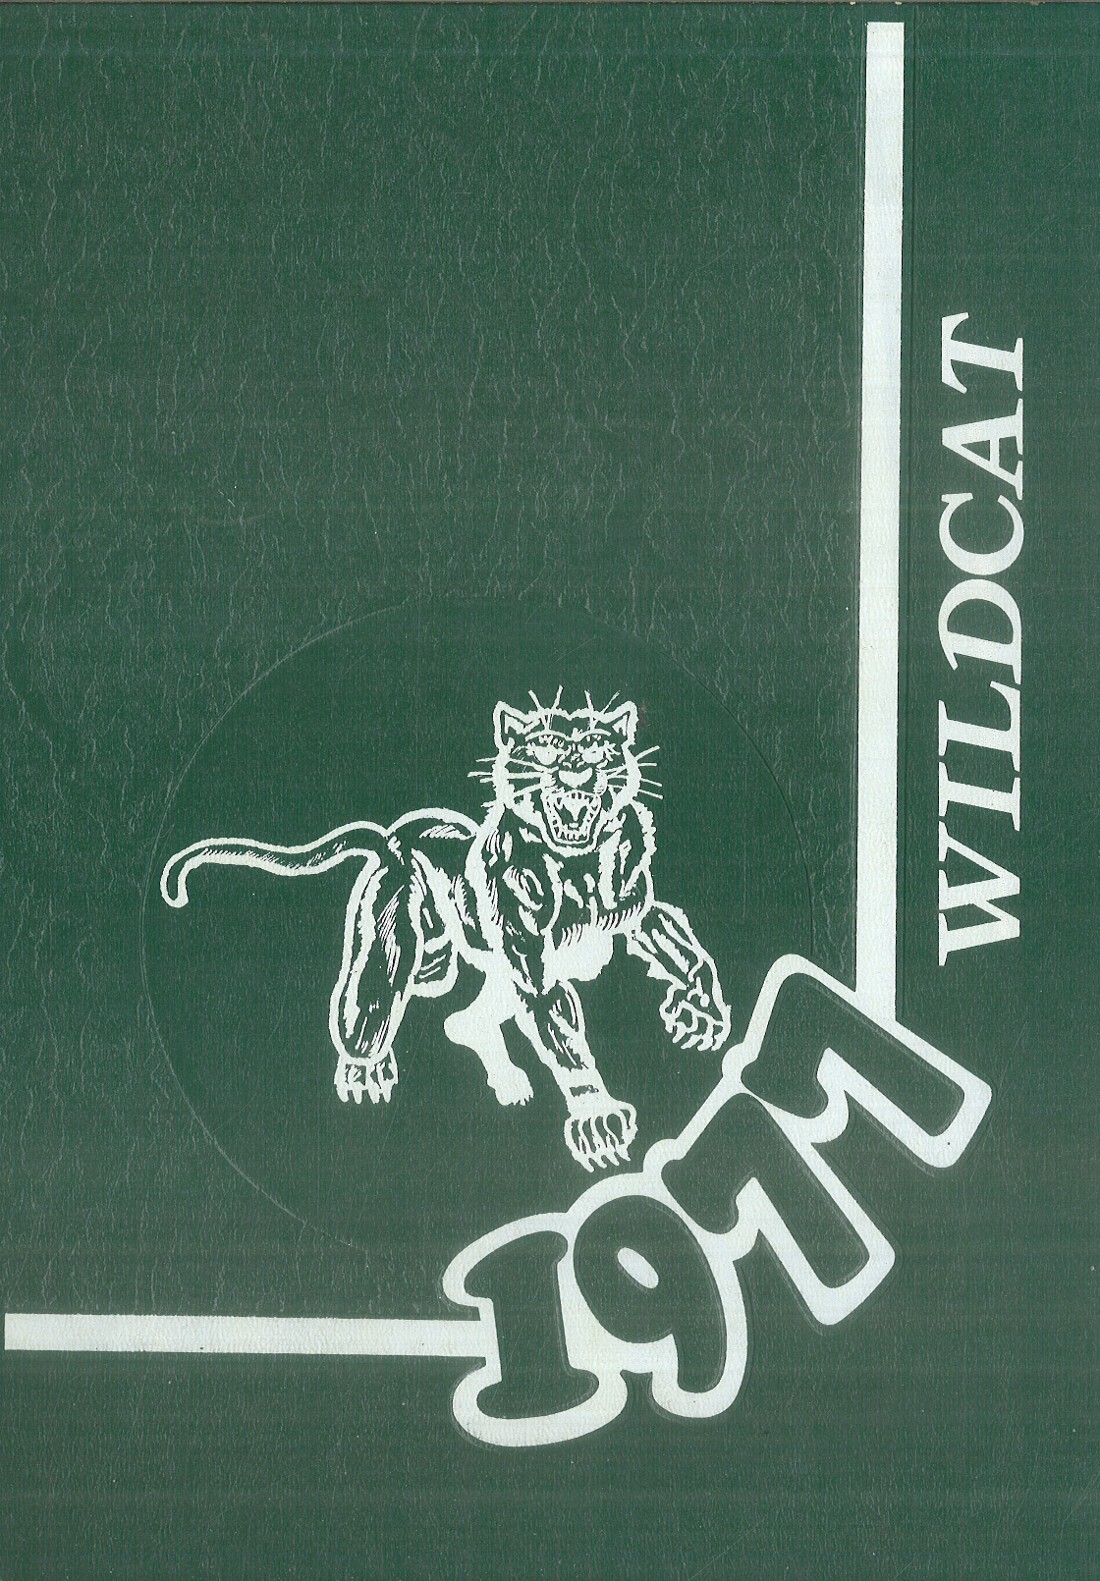 1977 yearbook from Kennedale High School from Kennedale, Texas for sale